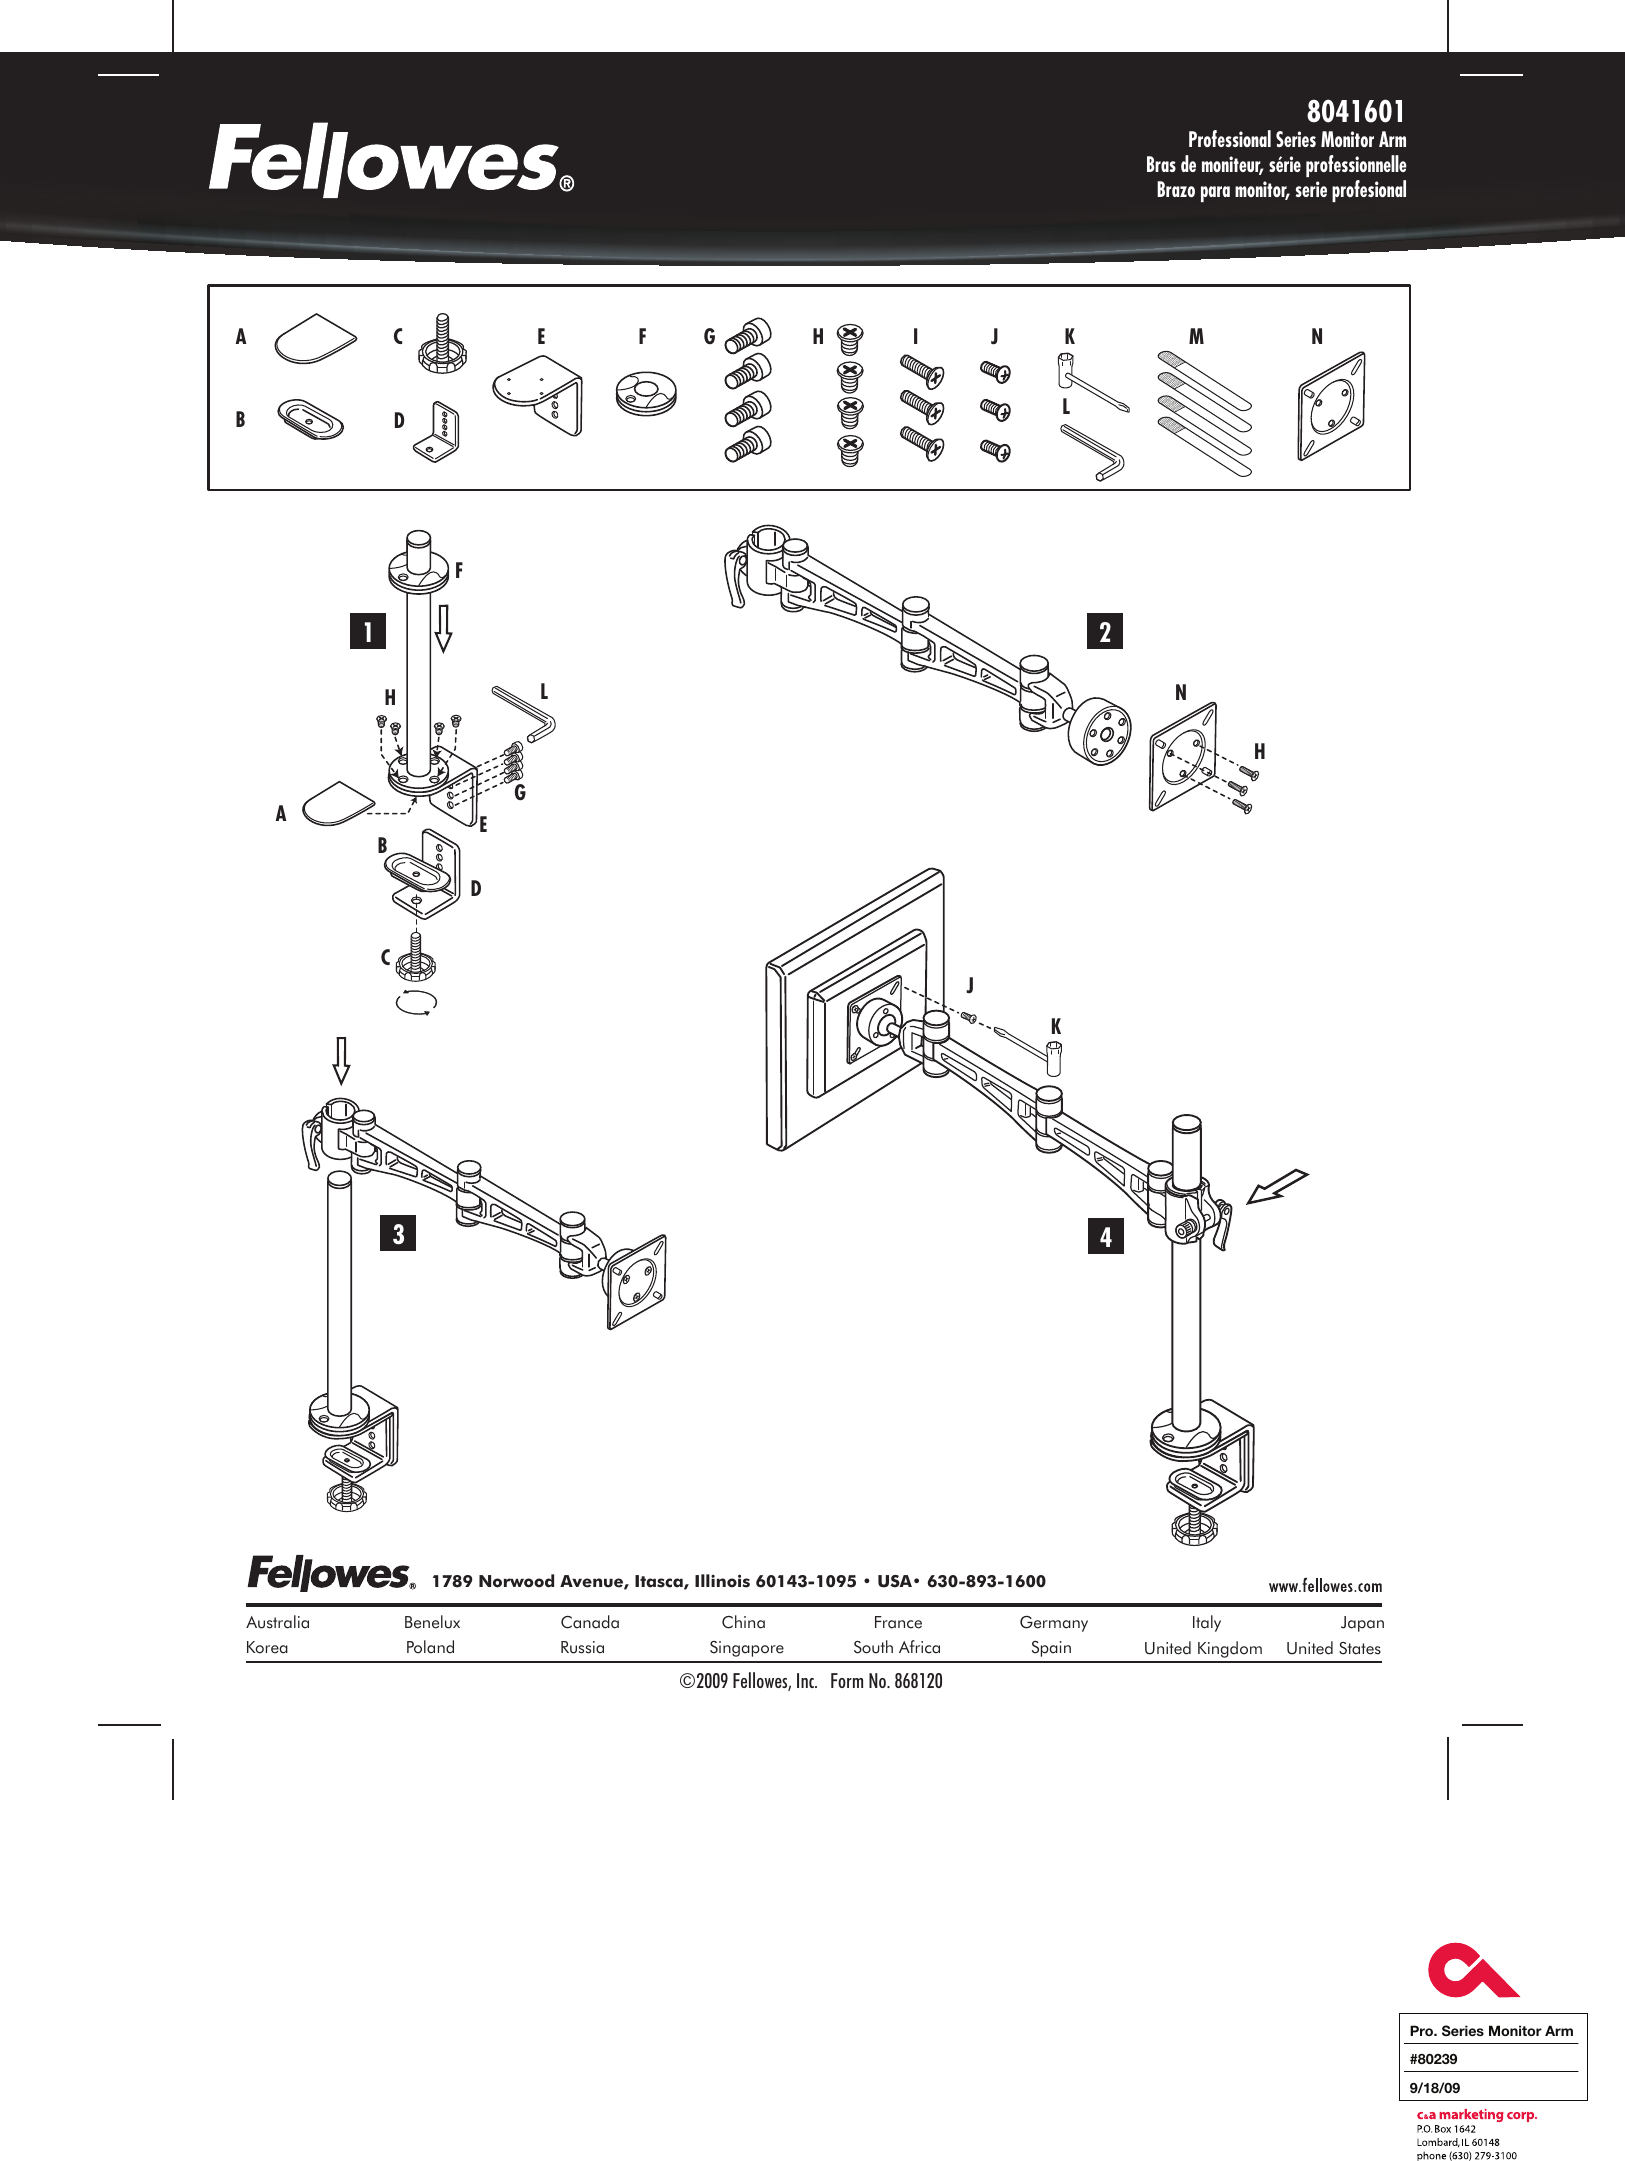 Page 1 of 1 - Fellowes Fellowes-Professional-Series-Depth-Adjustable-Monitor-Arm-Users-Manual- 8041601_ProSeriesMntArmInst2_091809  Fellowes-professional-series-depth-adjustable-monitor-arm-users-manual